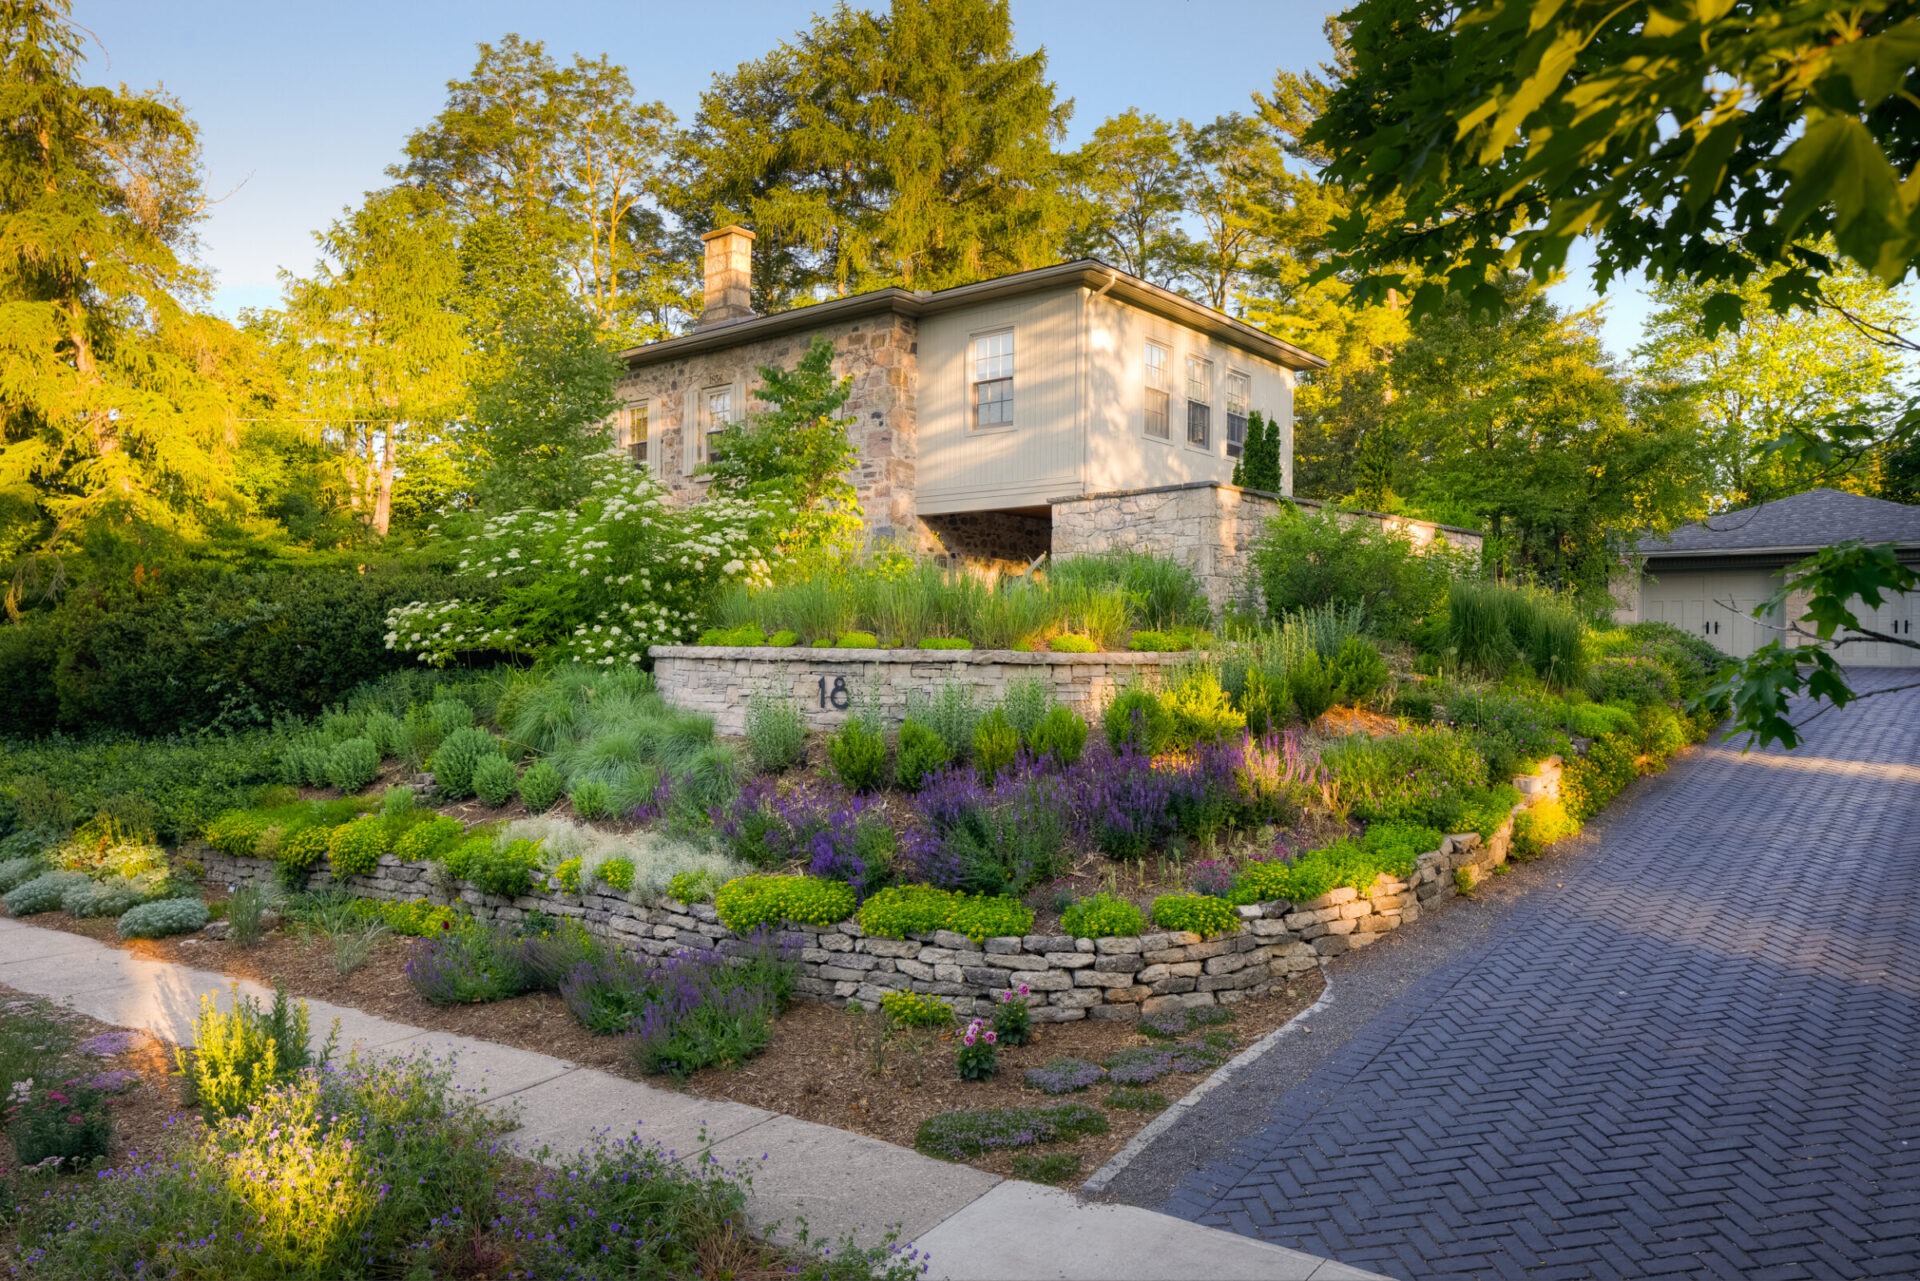 A stone house with beige siding sits amidst lush landscaping with blooming purple flowers, greenery, and a cobblestone driveway during sunset.